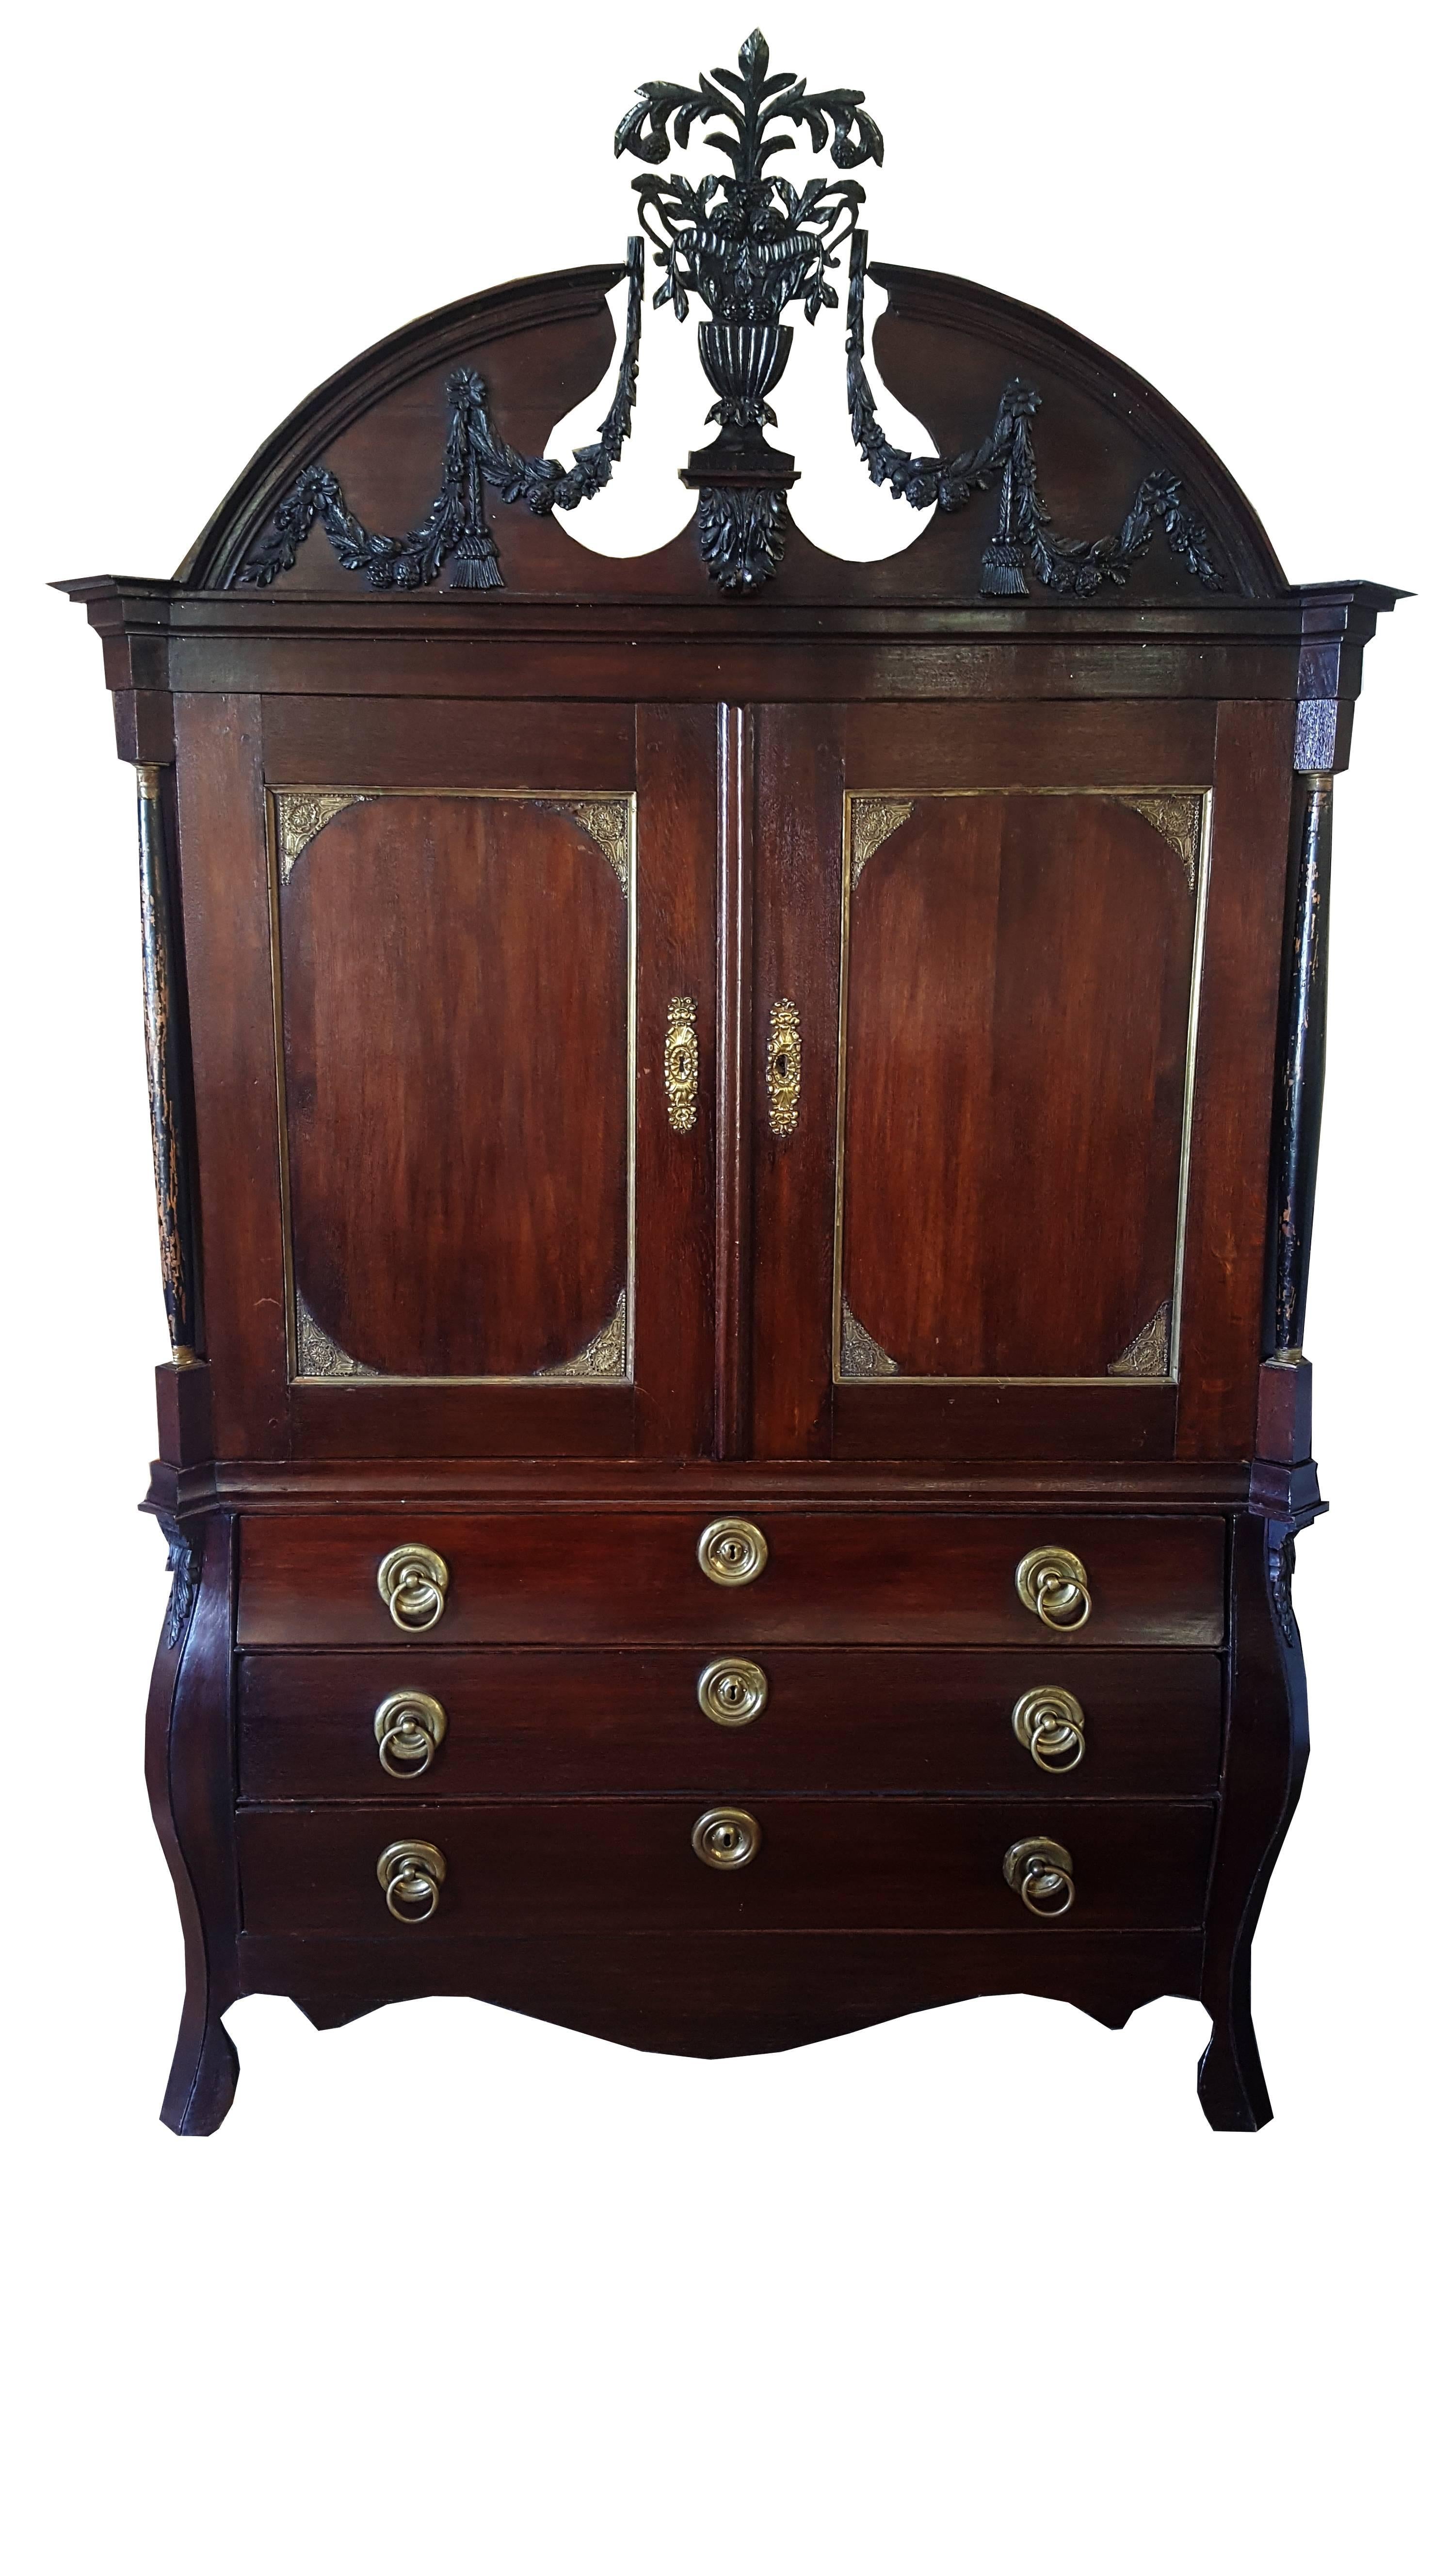 Almost identical pair of 19th century Dutch Colonial linen presses. Stunning hand-carved details and delicate gilt work adorn this delightful pair of mahogany linen presses. Elegant brass hardware finishes puts the cherry on top of this gorgeous